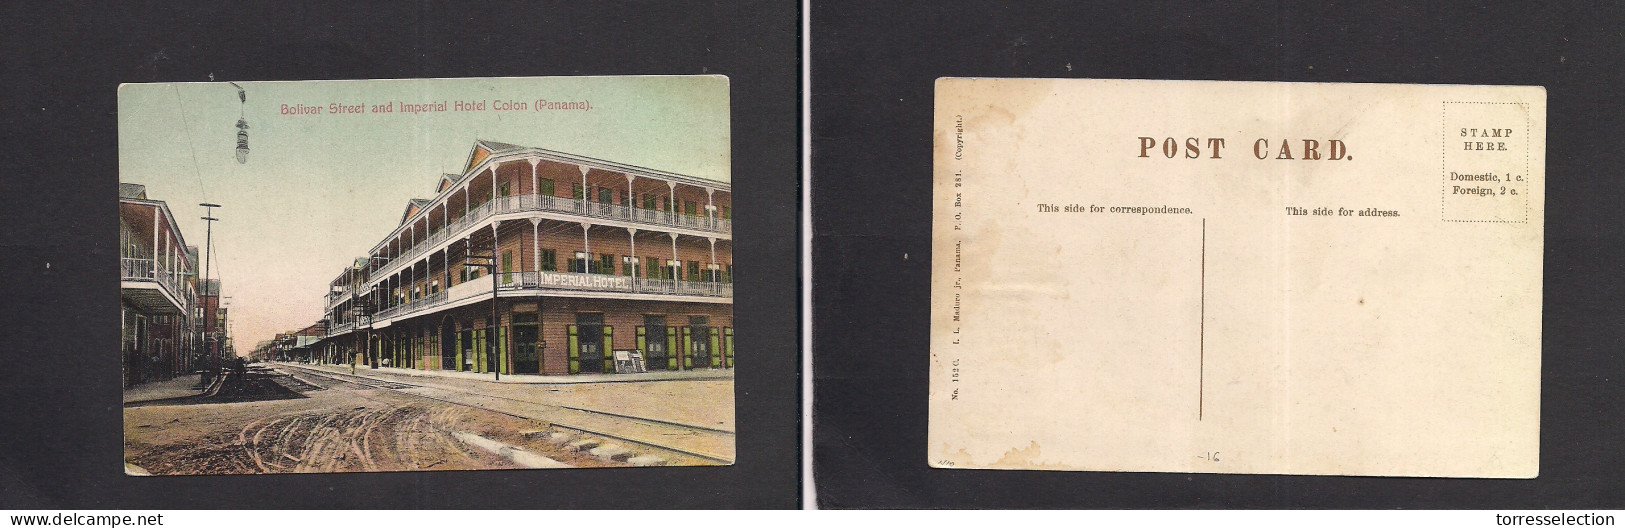 PANAMA. C. 1910s. Uncirculated Early Color Imperial Hotel Ppc. XSALE. - Panama